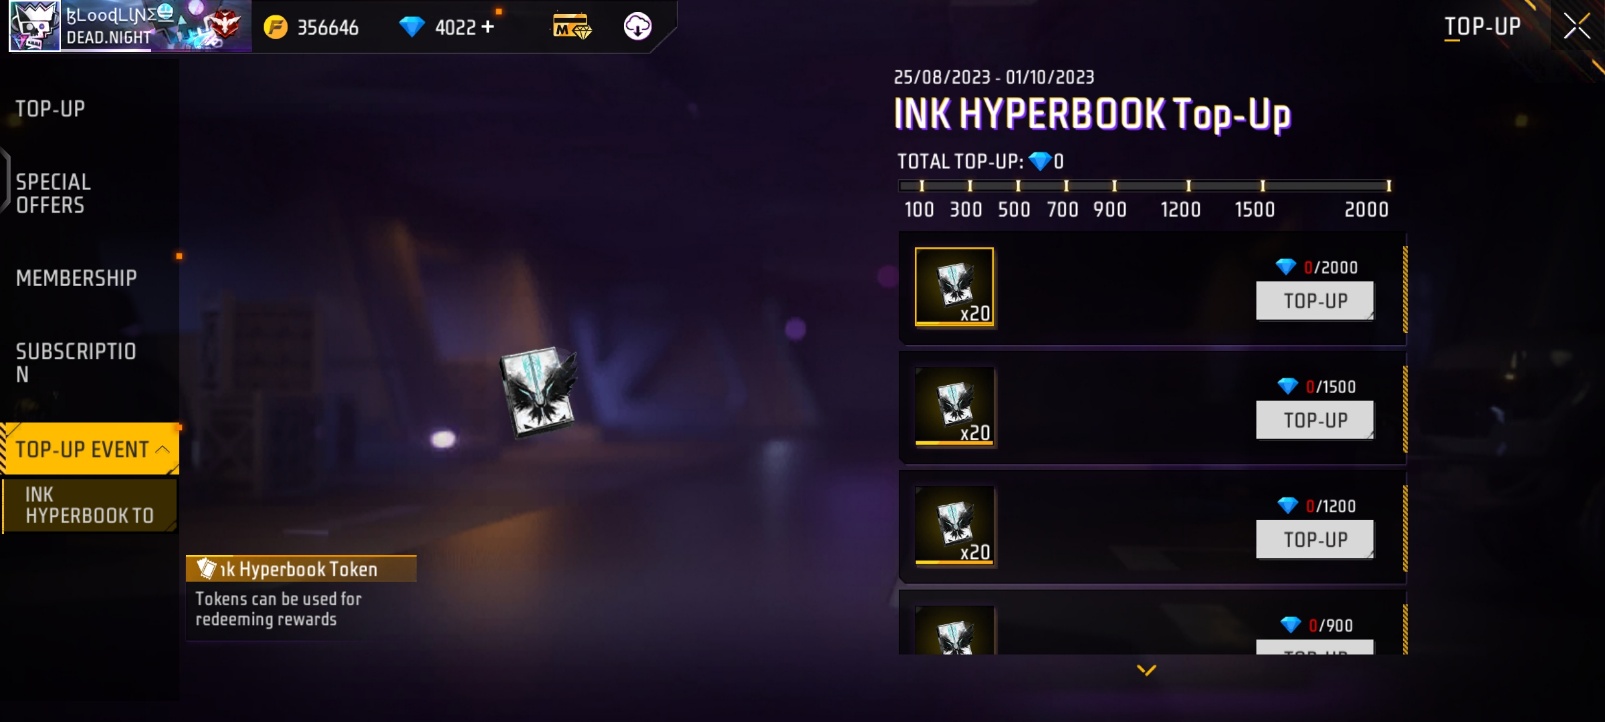 How To Get The Ink Hyperbook In Free Fire